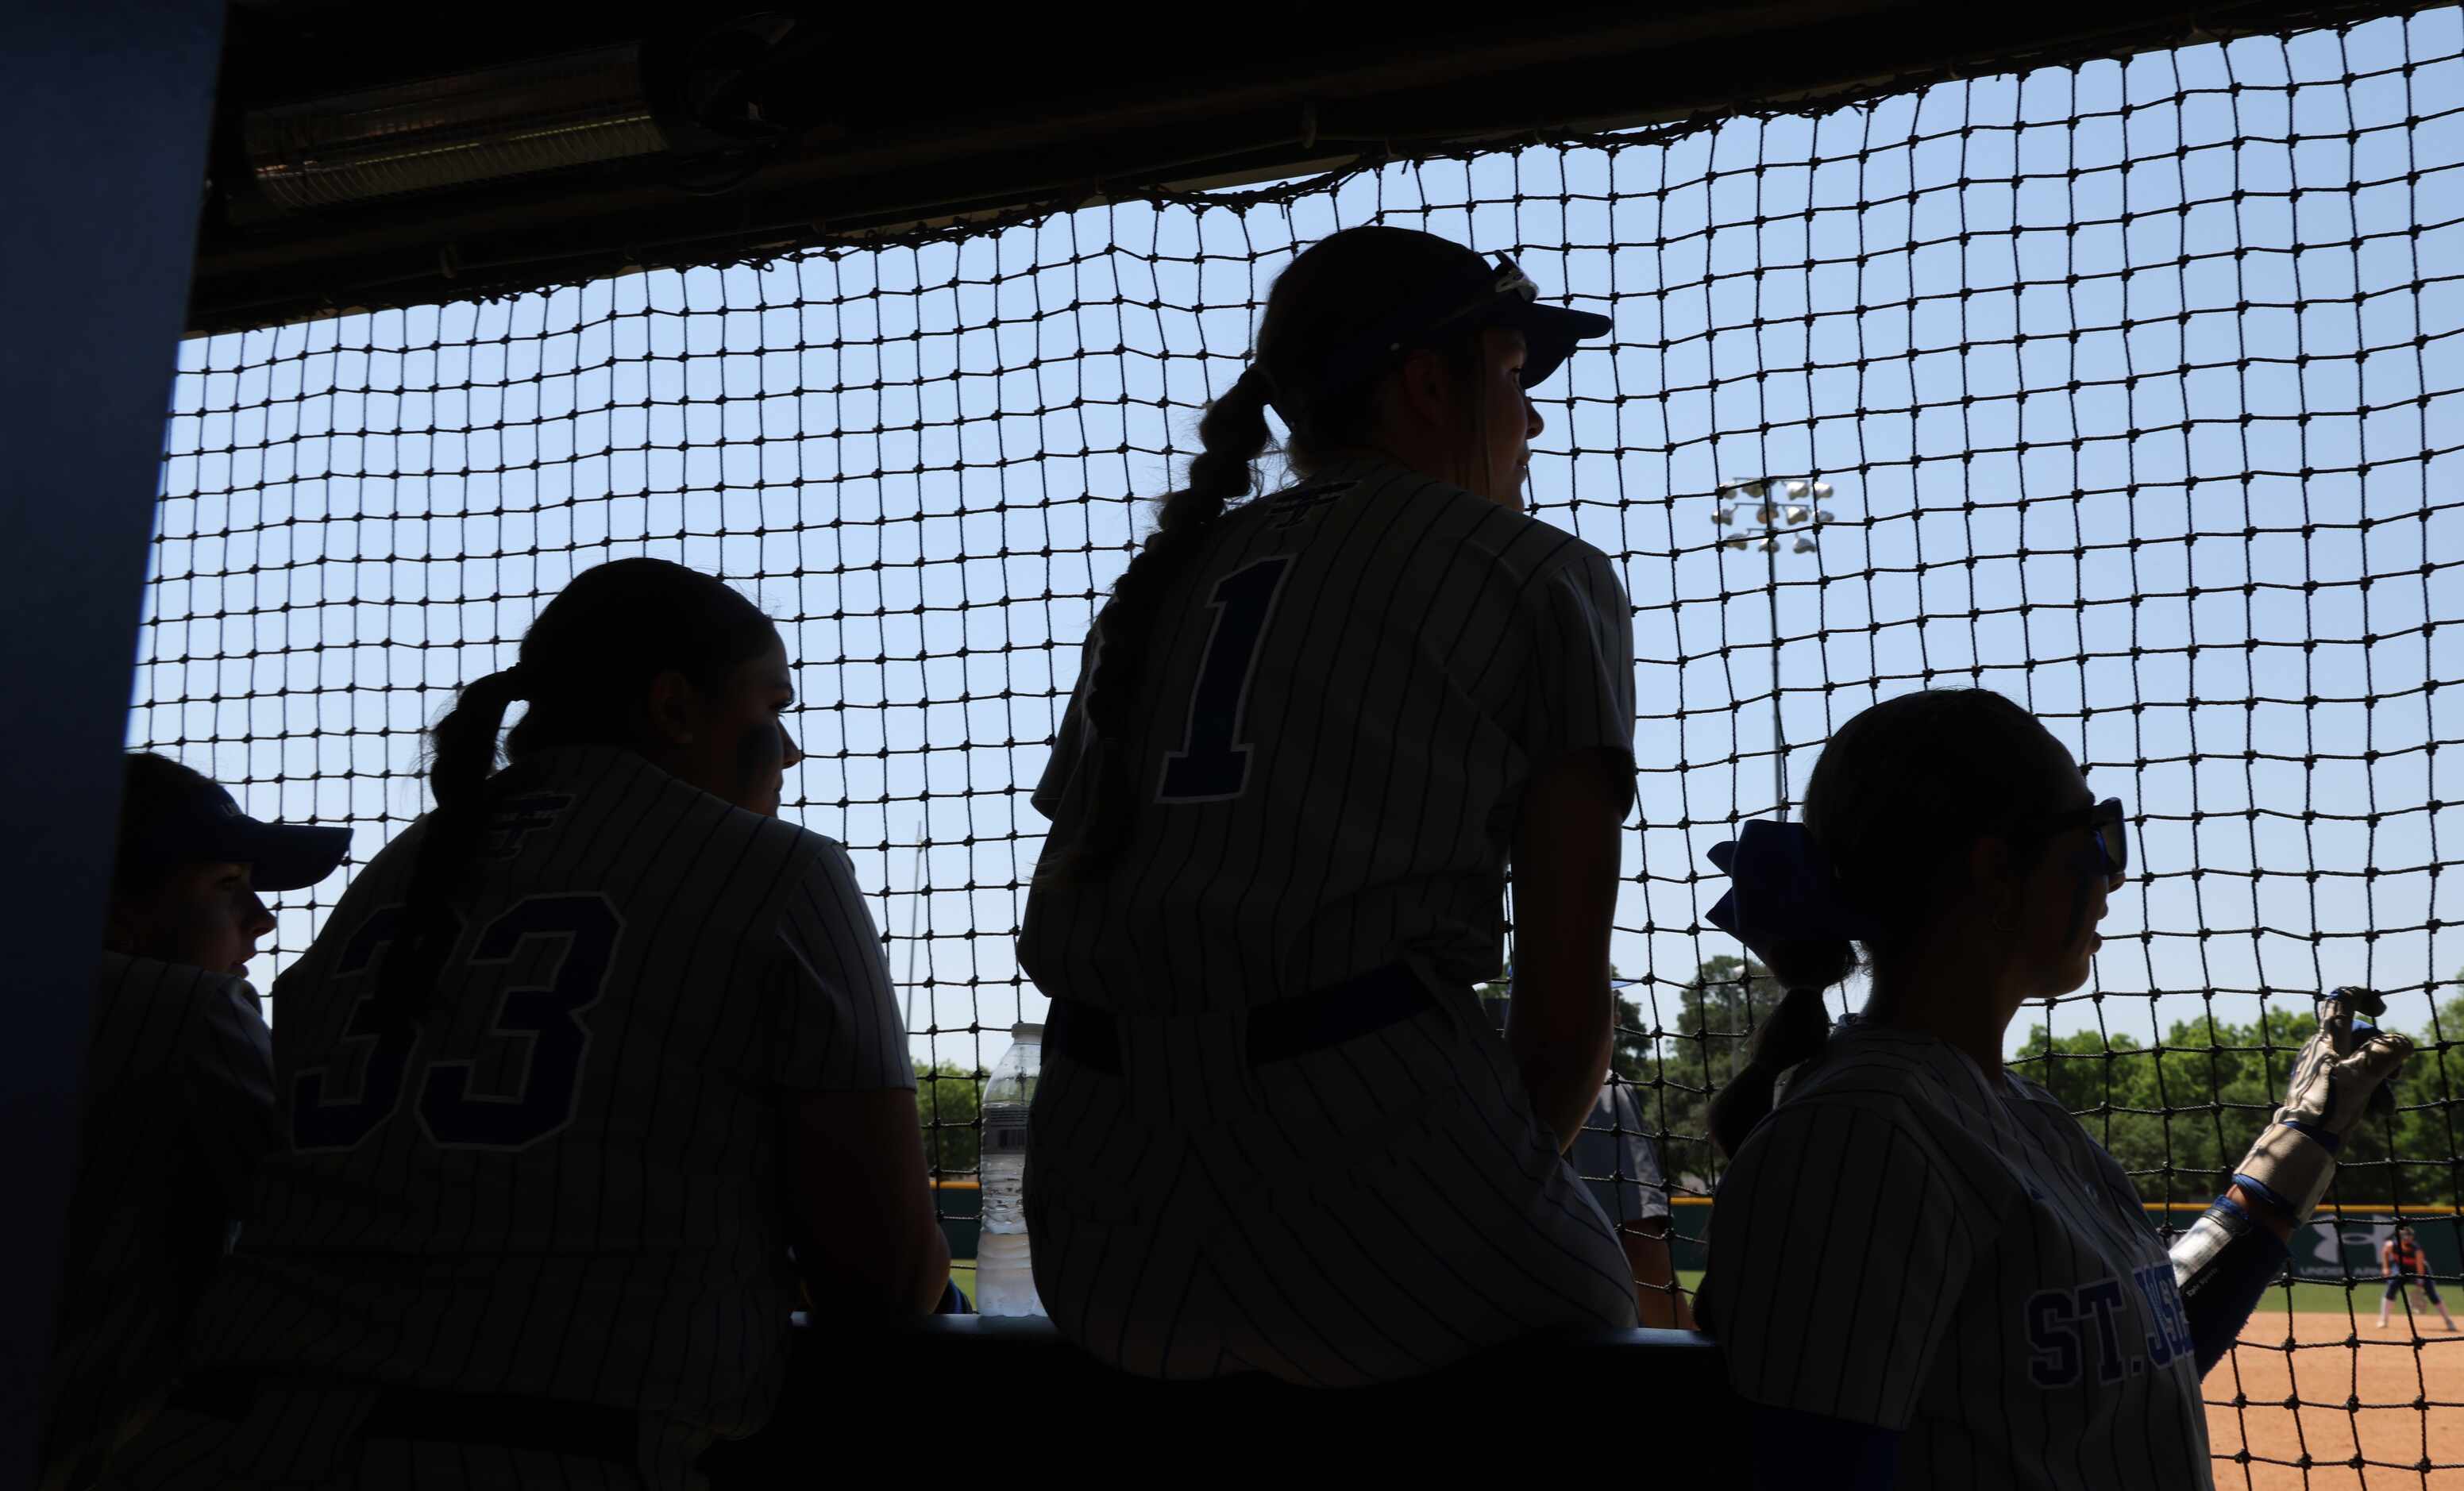 Victoria St Joseph players look on from there team dugout during 4th inning play against...